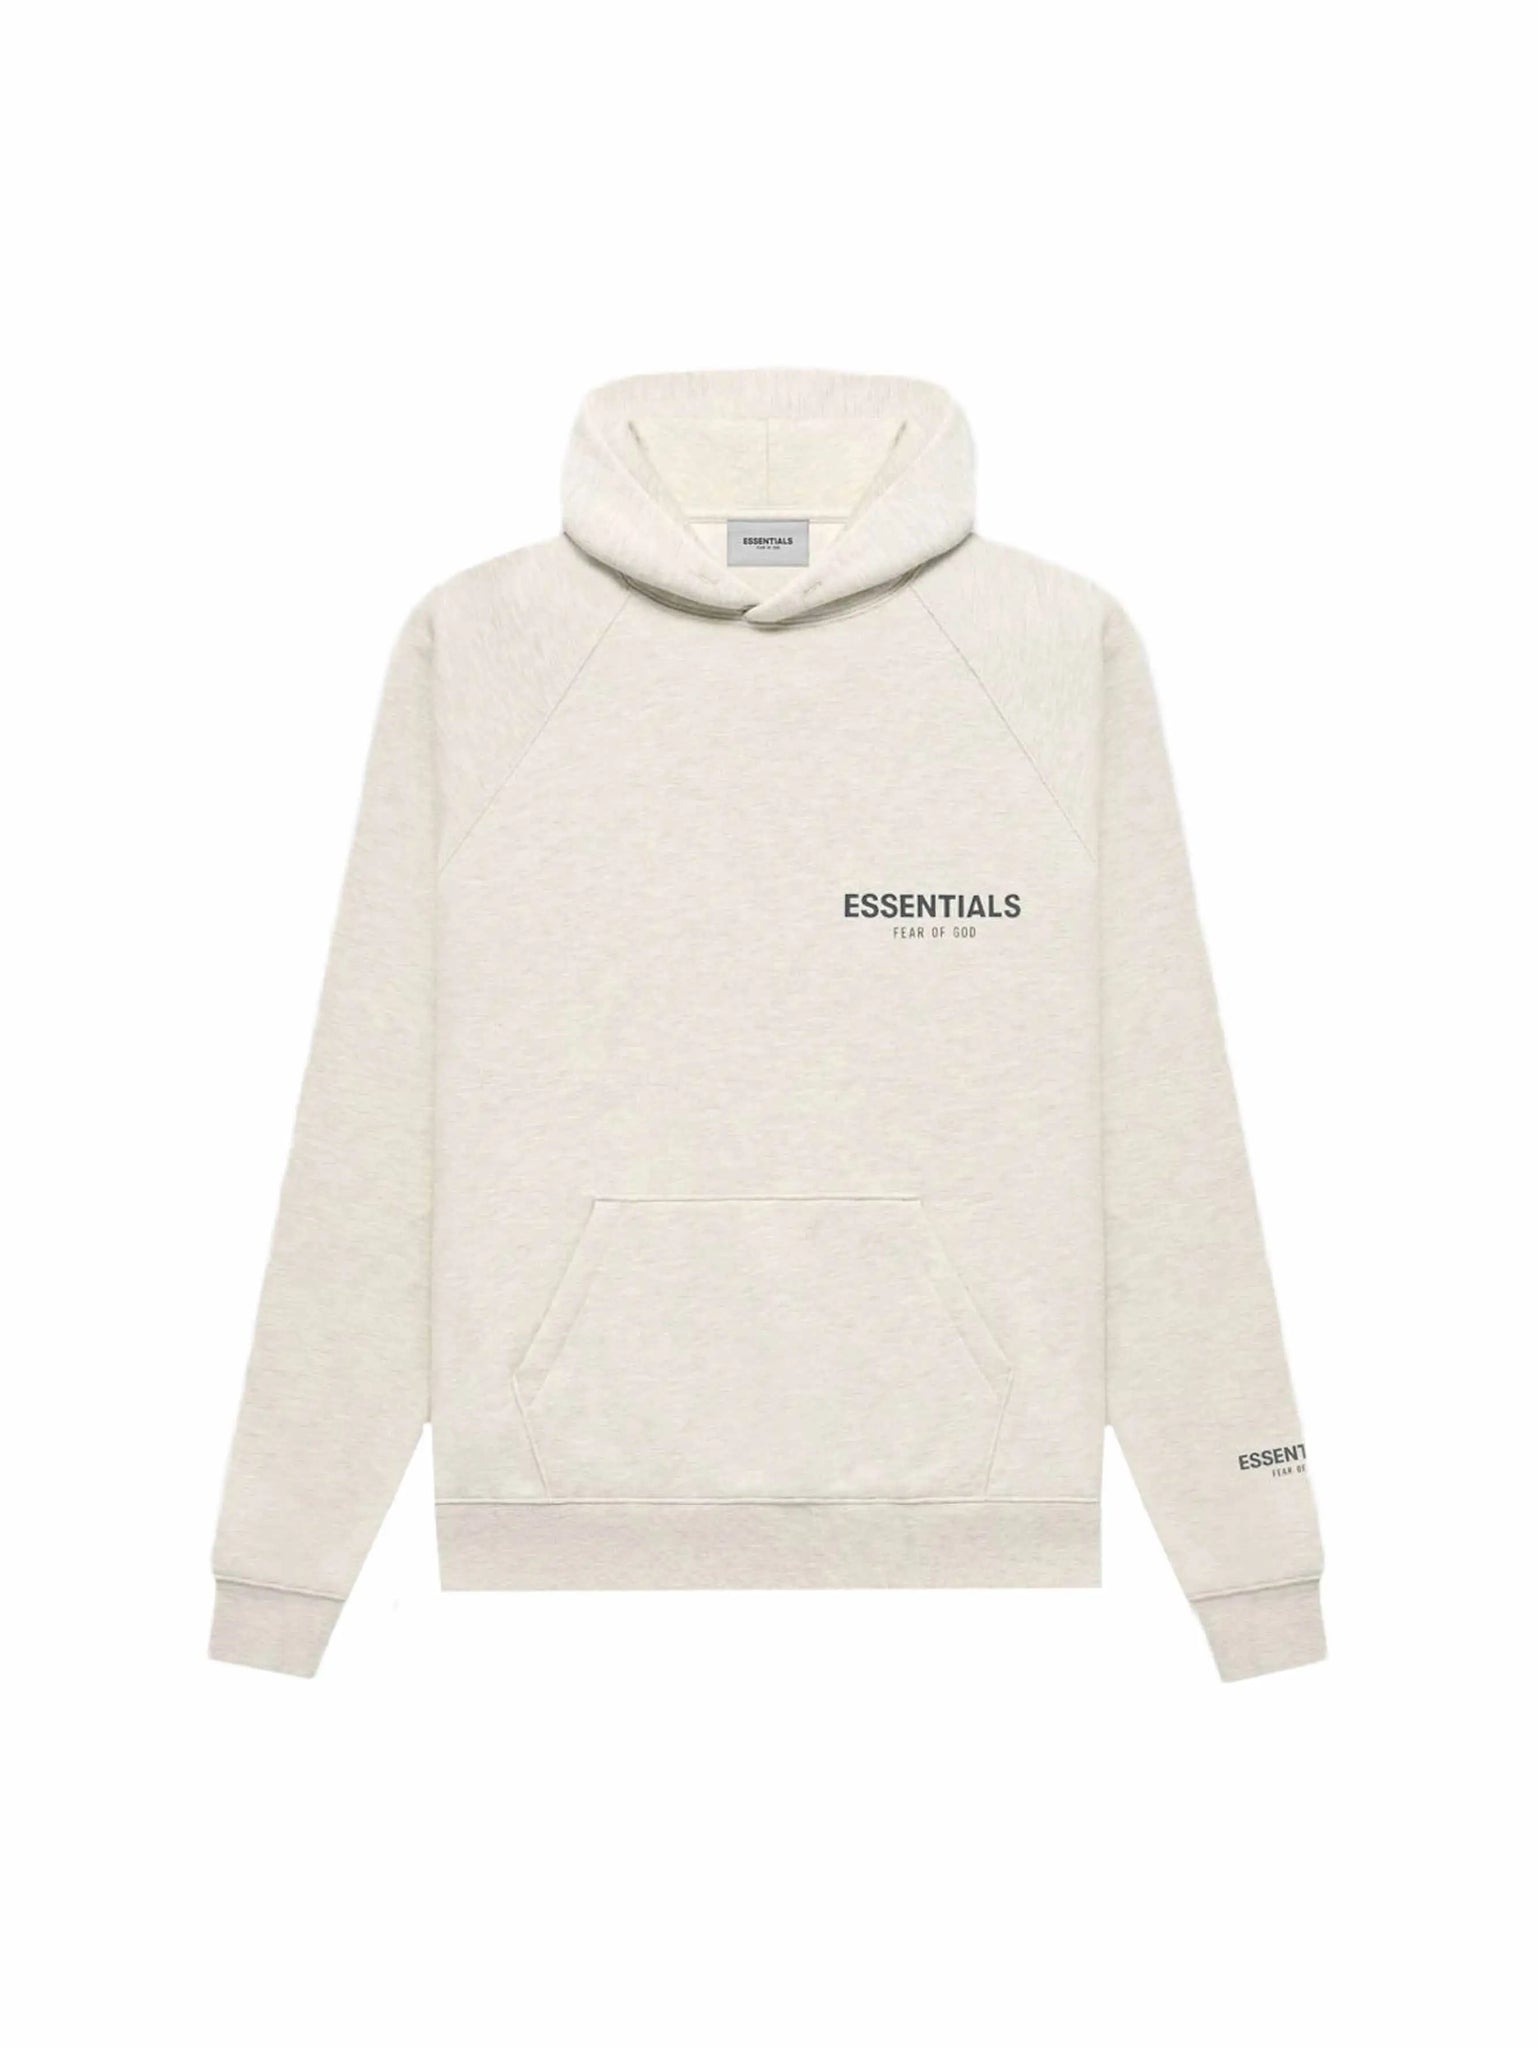 Fear of God Essentials Core Collection Pullover Hoodie Light Heather Oatmeal - Prior